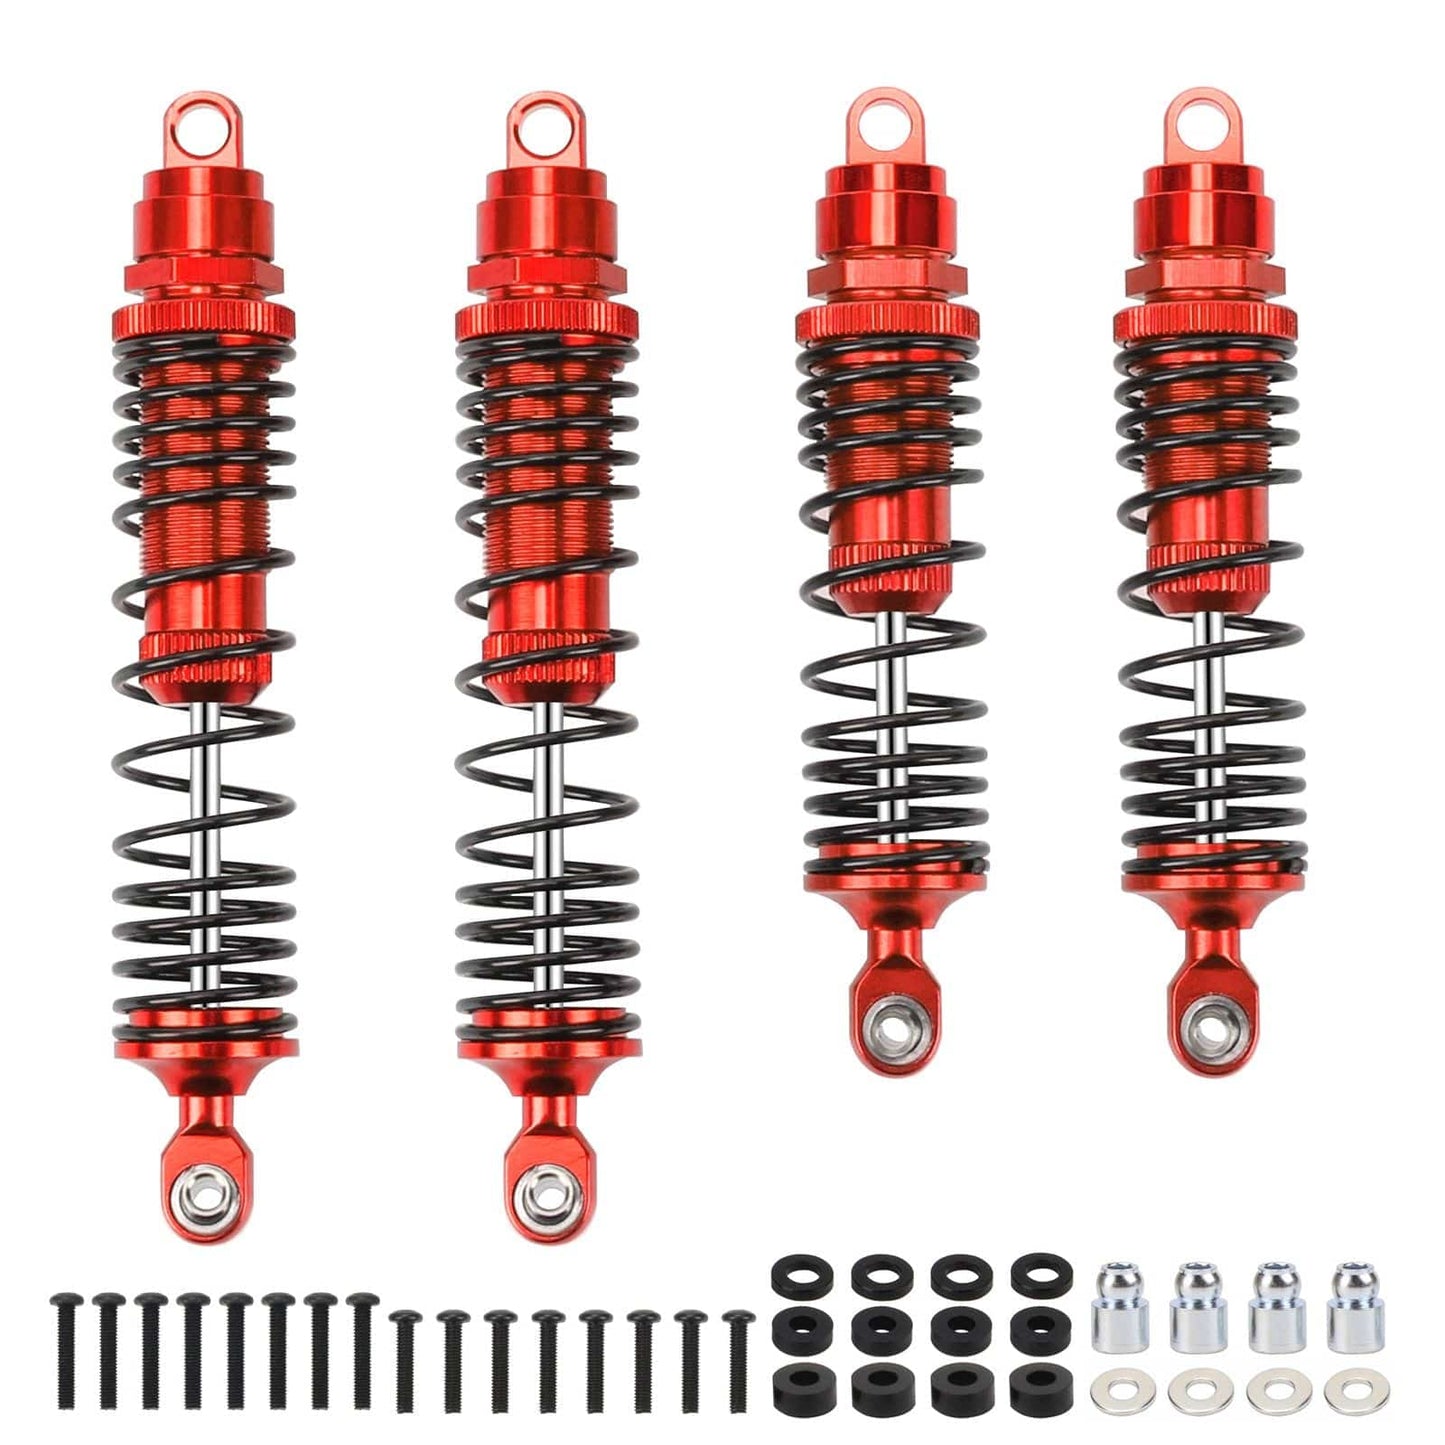 RCAWD TRAXXAS SLASH 2WD RCAWD Aluminum Shocks Absorber oil-filled type for 1/10 Slash 2wd Series